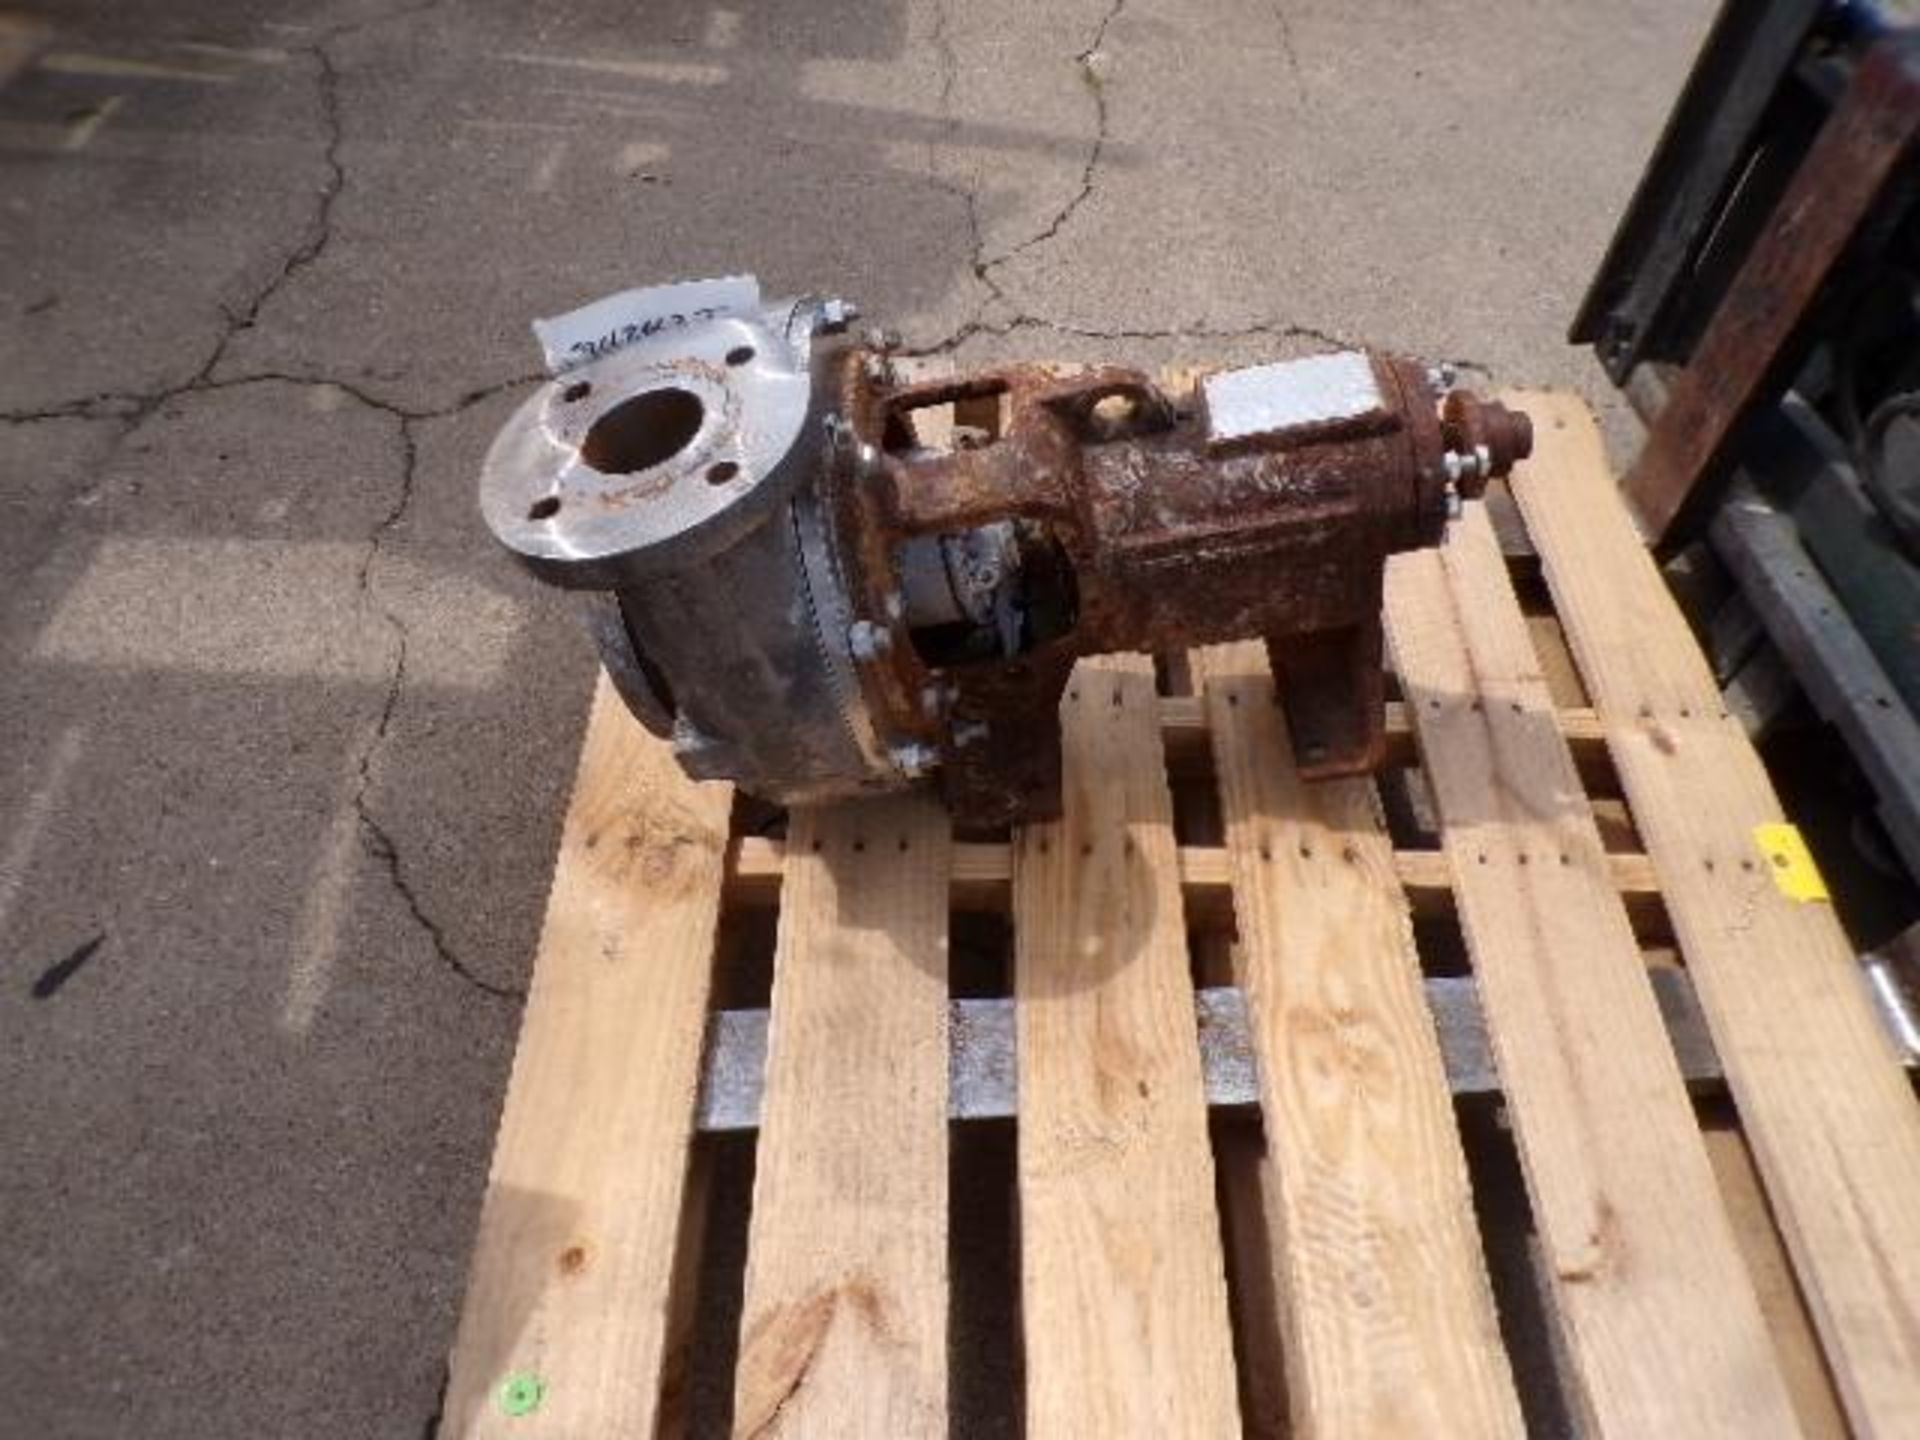 Pallet w/ (1) Discflo Pump, Model 403-12, 100 GPM, S/N 8455, 4" to 3" Ports (Used)